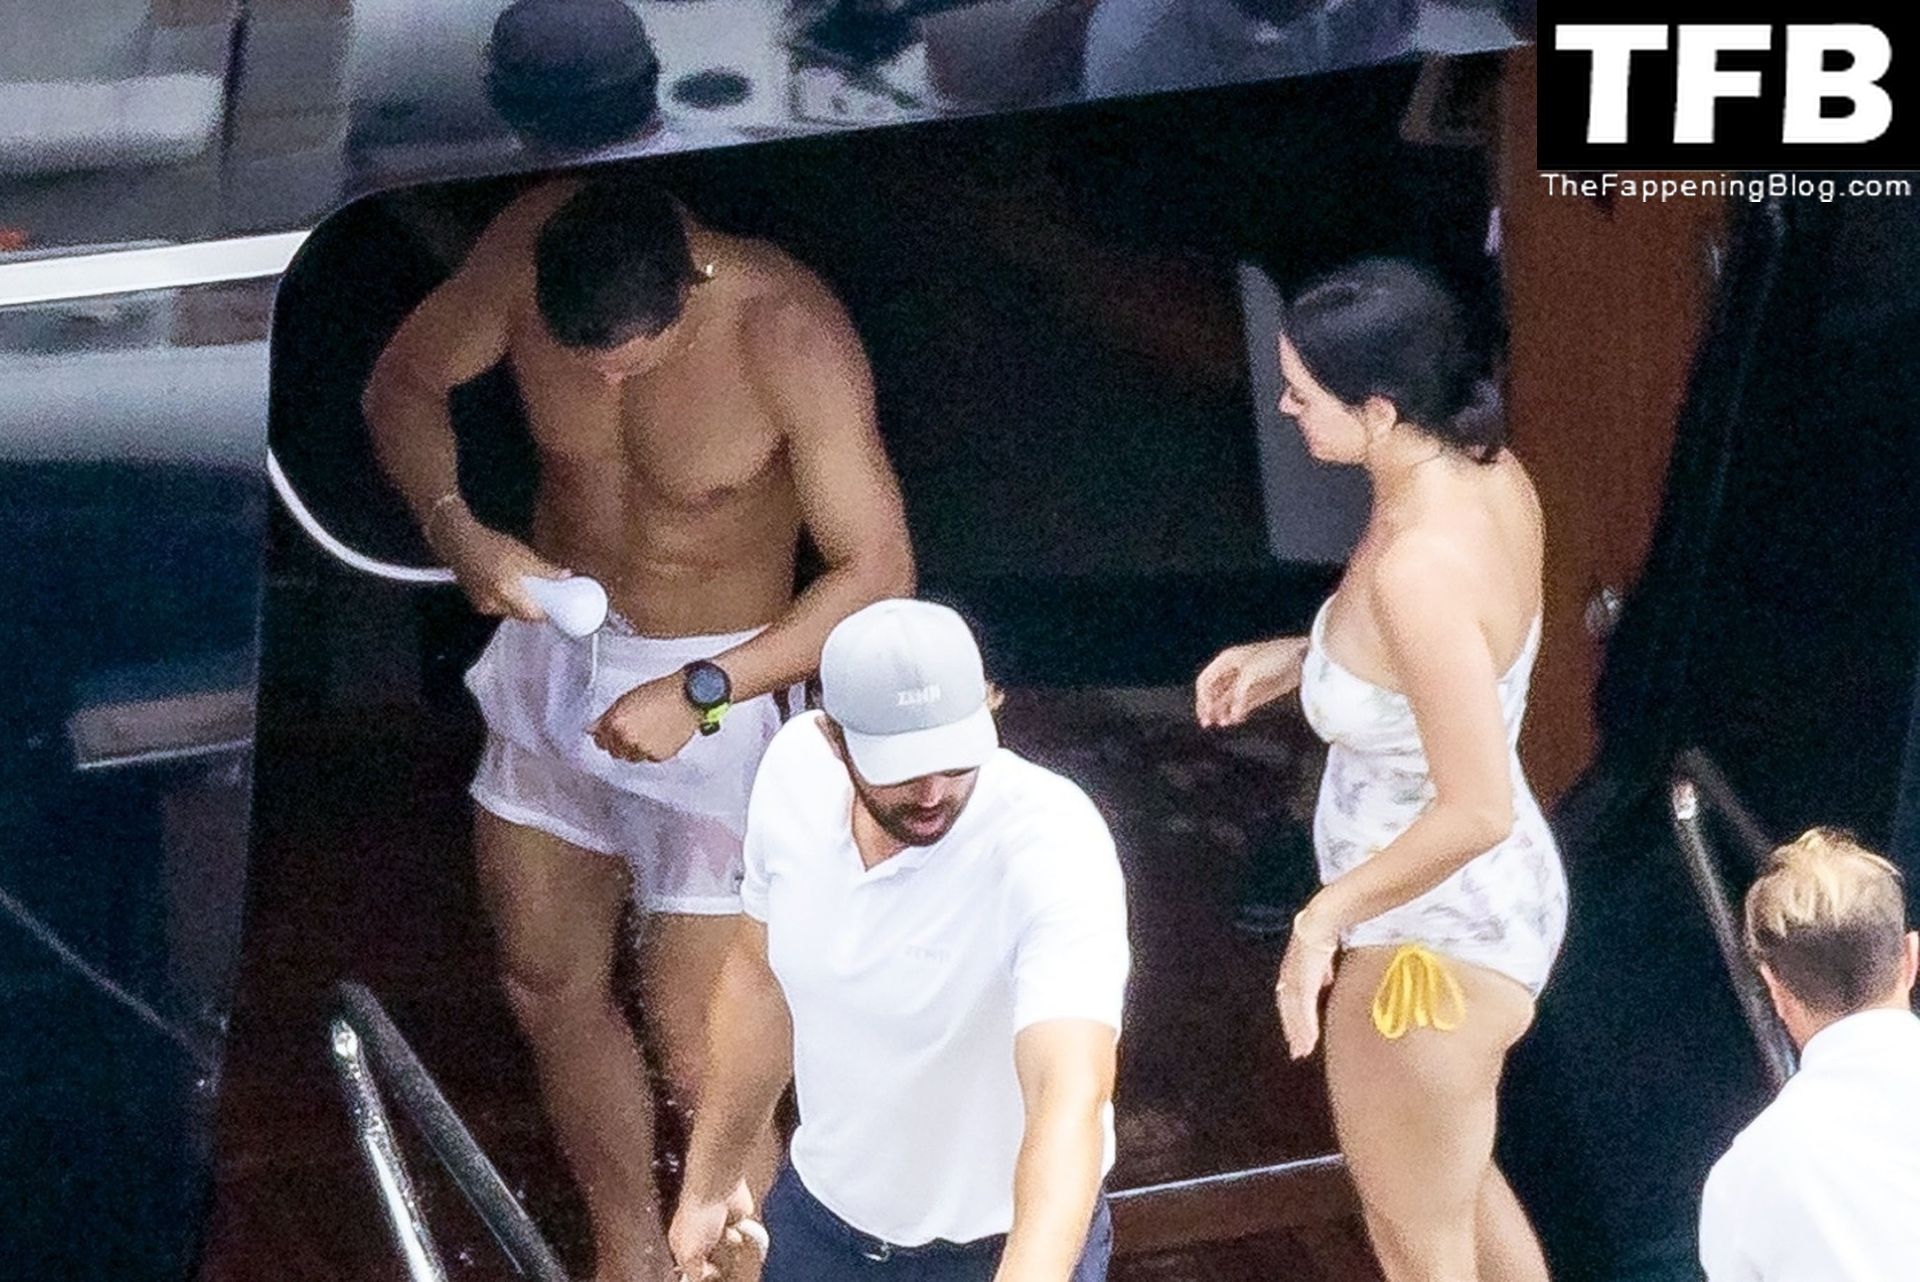 Katy Perry Sexy The Fappening Blog 91 - Katy Perry Rocks a Strapless Swimsuit While Enjoying a Beach Day with Orlando Bloom in Positano (105 Photos)